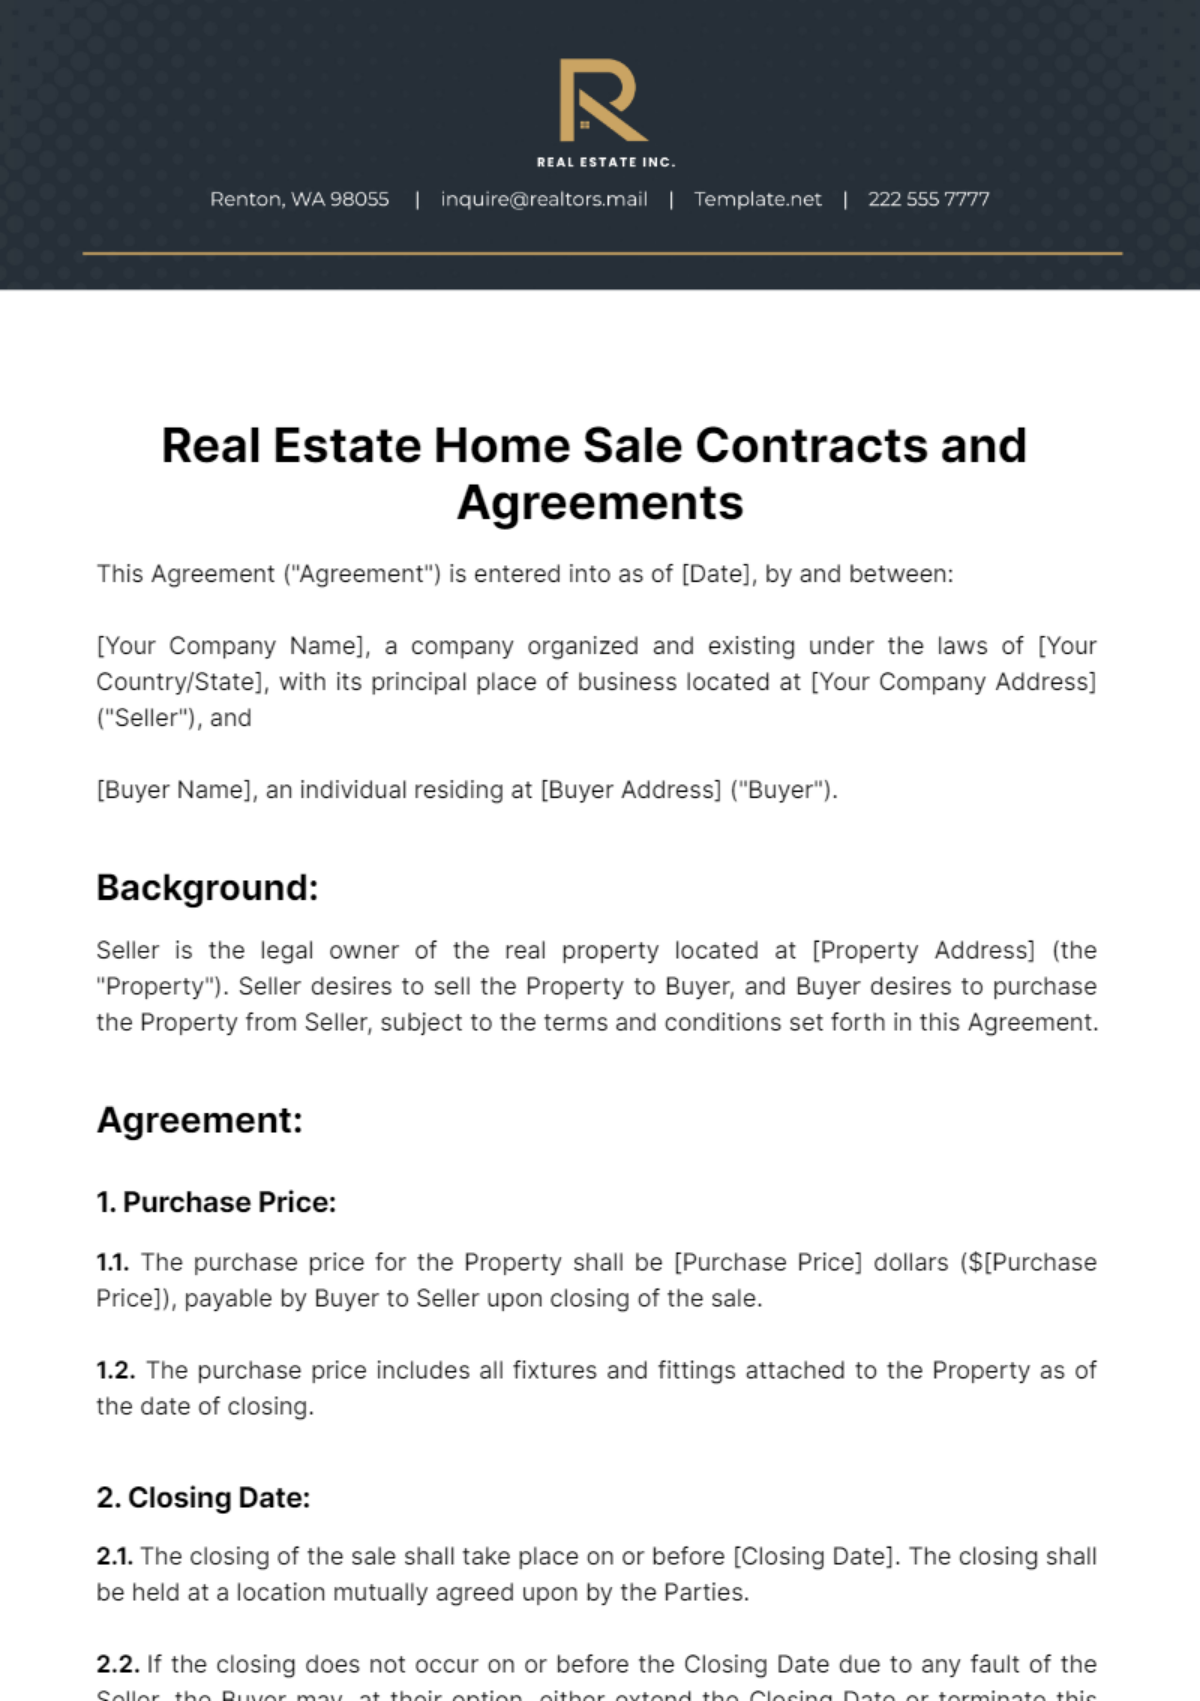 Free Real Estate Home Sale Contracts and Agreements Template